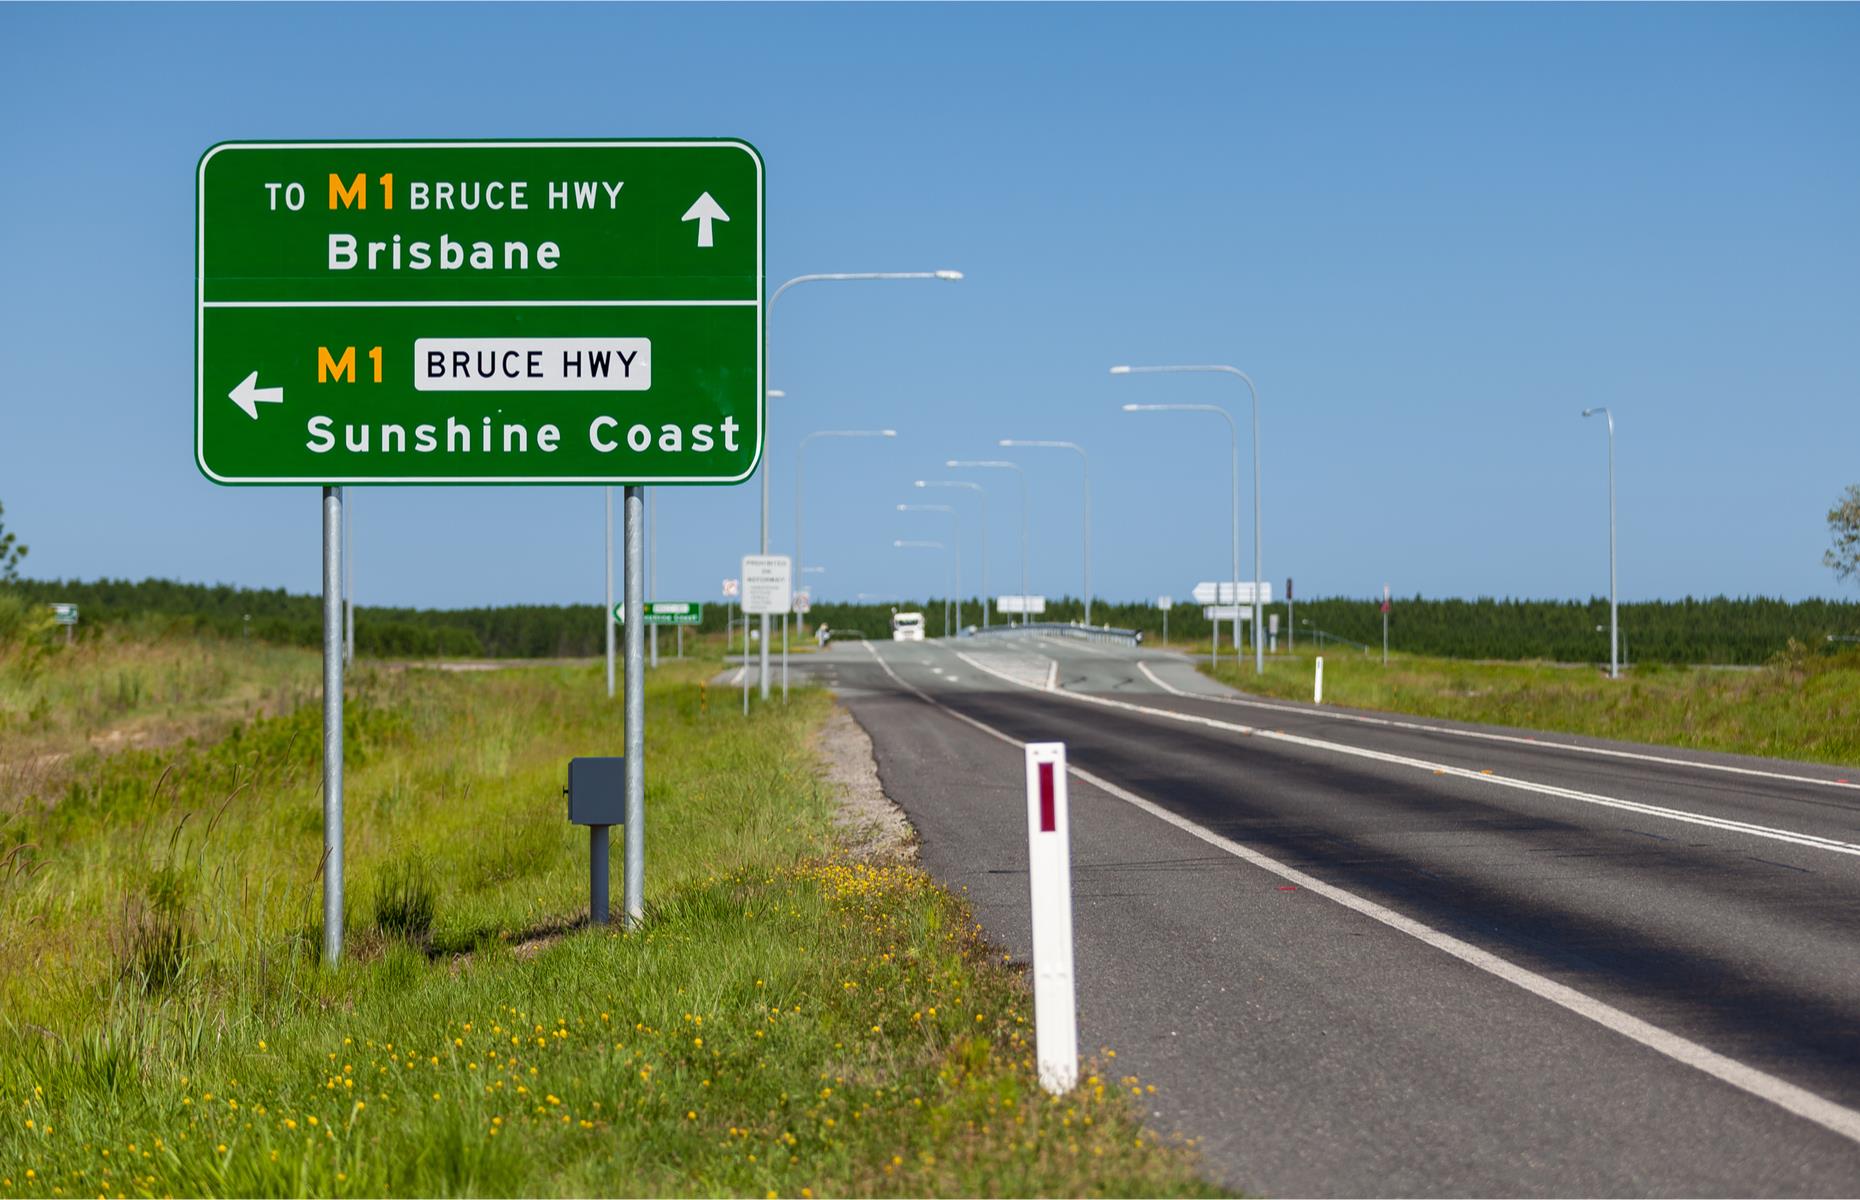 <p>Sun- and fun-filled days are a given on the 273-mile (440km) Great Sunshine Way, which stretches north from the buzzy Gold Coast along Queensland's subtropical coastline via Brisbane to Bundaberg. As well as sun-drenched beaches at every turn, you’ll see koalas and whales, eat in fantastic restaurants and pass stunning national parks. Start the trip on a high note by hitting the theme parks of the Gold Coast or learning to surf at Surfers Paradise then hit the M1, AKA Great Sunshine Way.</p>